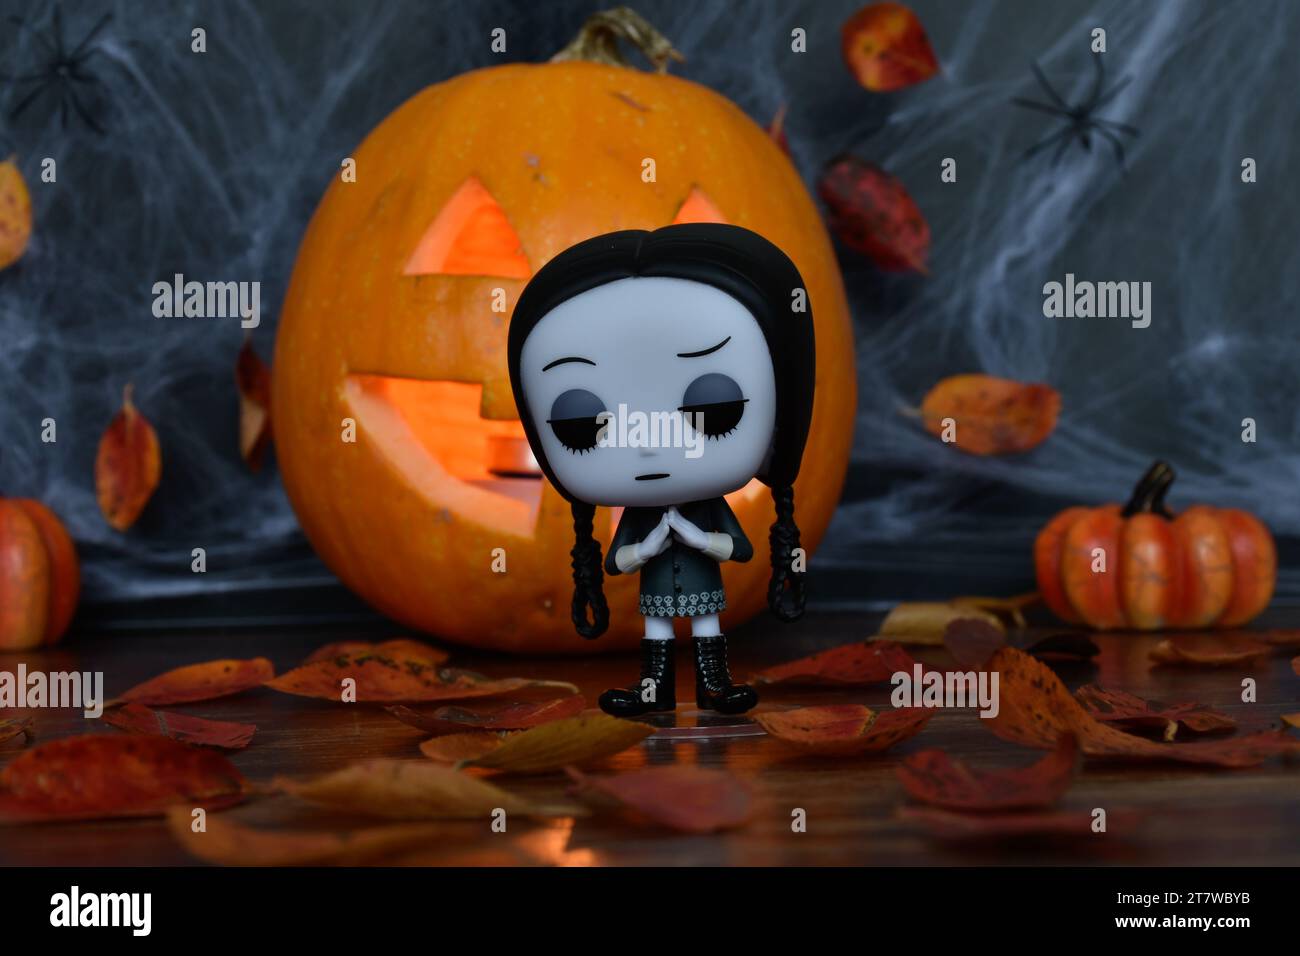 Funko Pop action figure of Wednesday Addams from animated film The Addams family. Halloween, Jack o lantern, spider web, autumn leaves, decor, spooky. Stock Photo